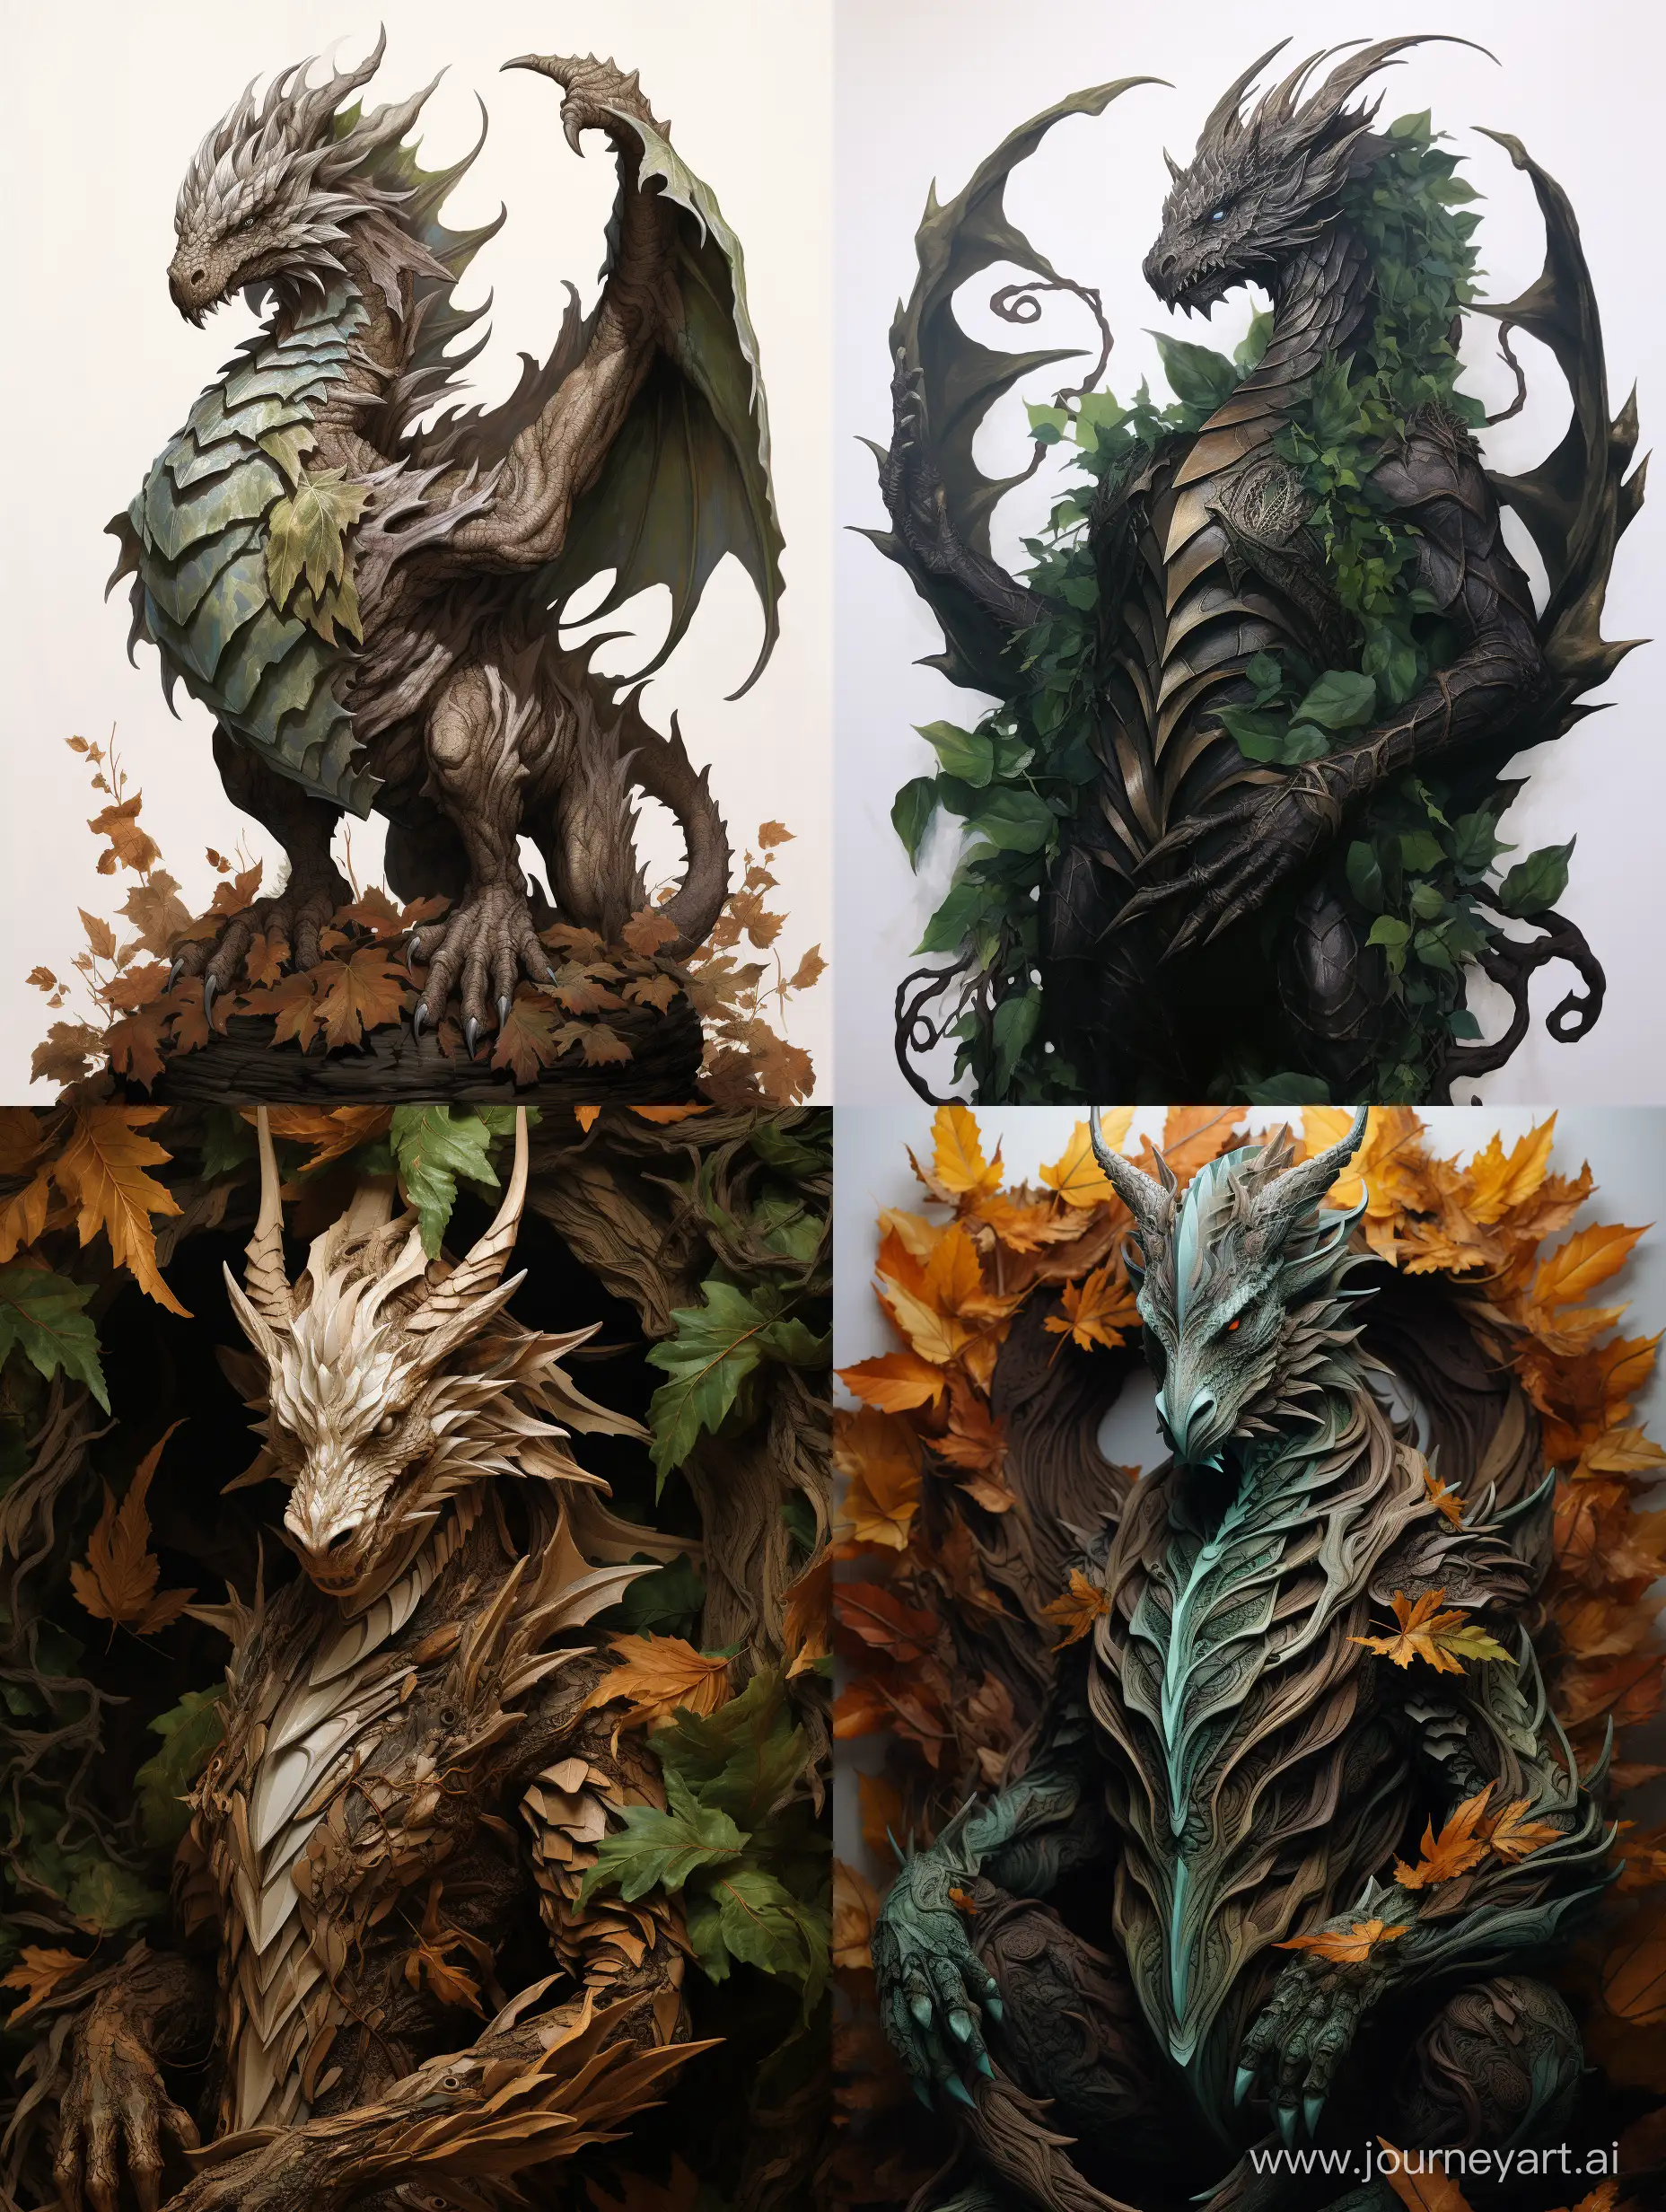 Full body of a Majestic Gothic Dragon made of oak leaves, 2D, Fantasy Art